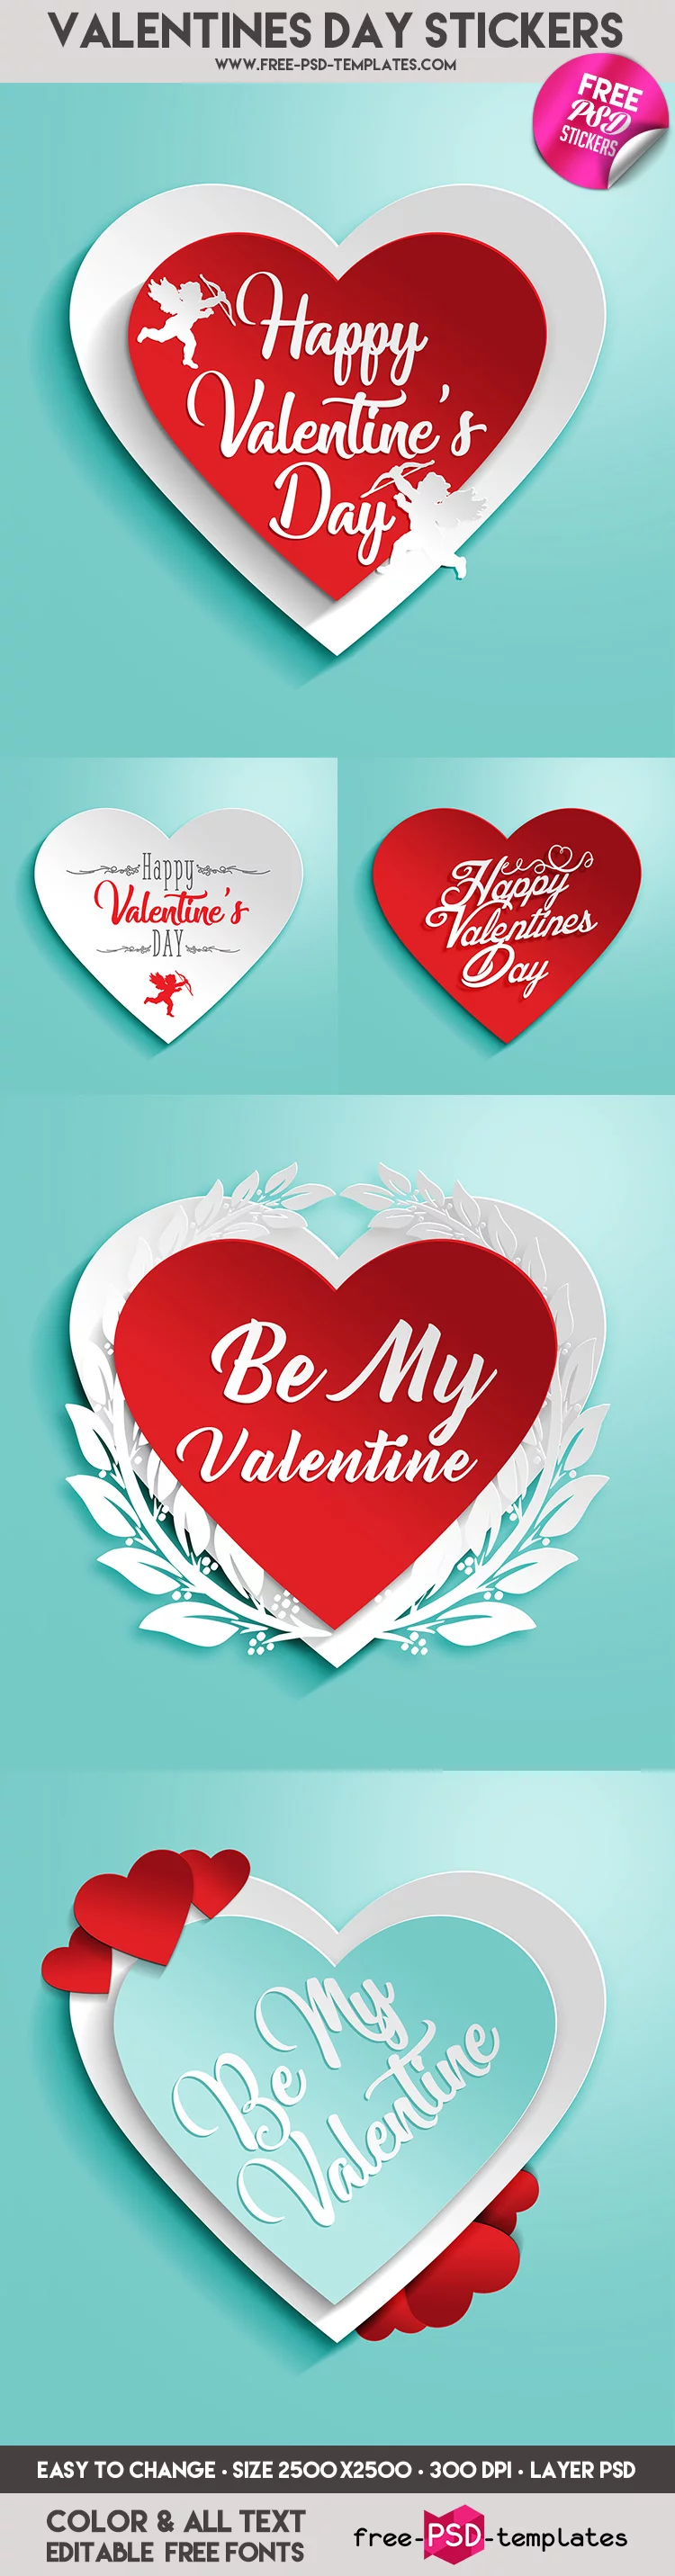 FREE 5 Valentine’s Day Stickers IN PSD